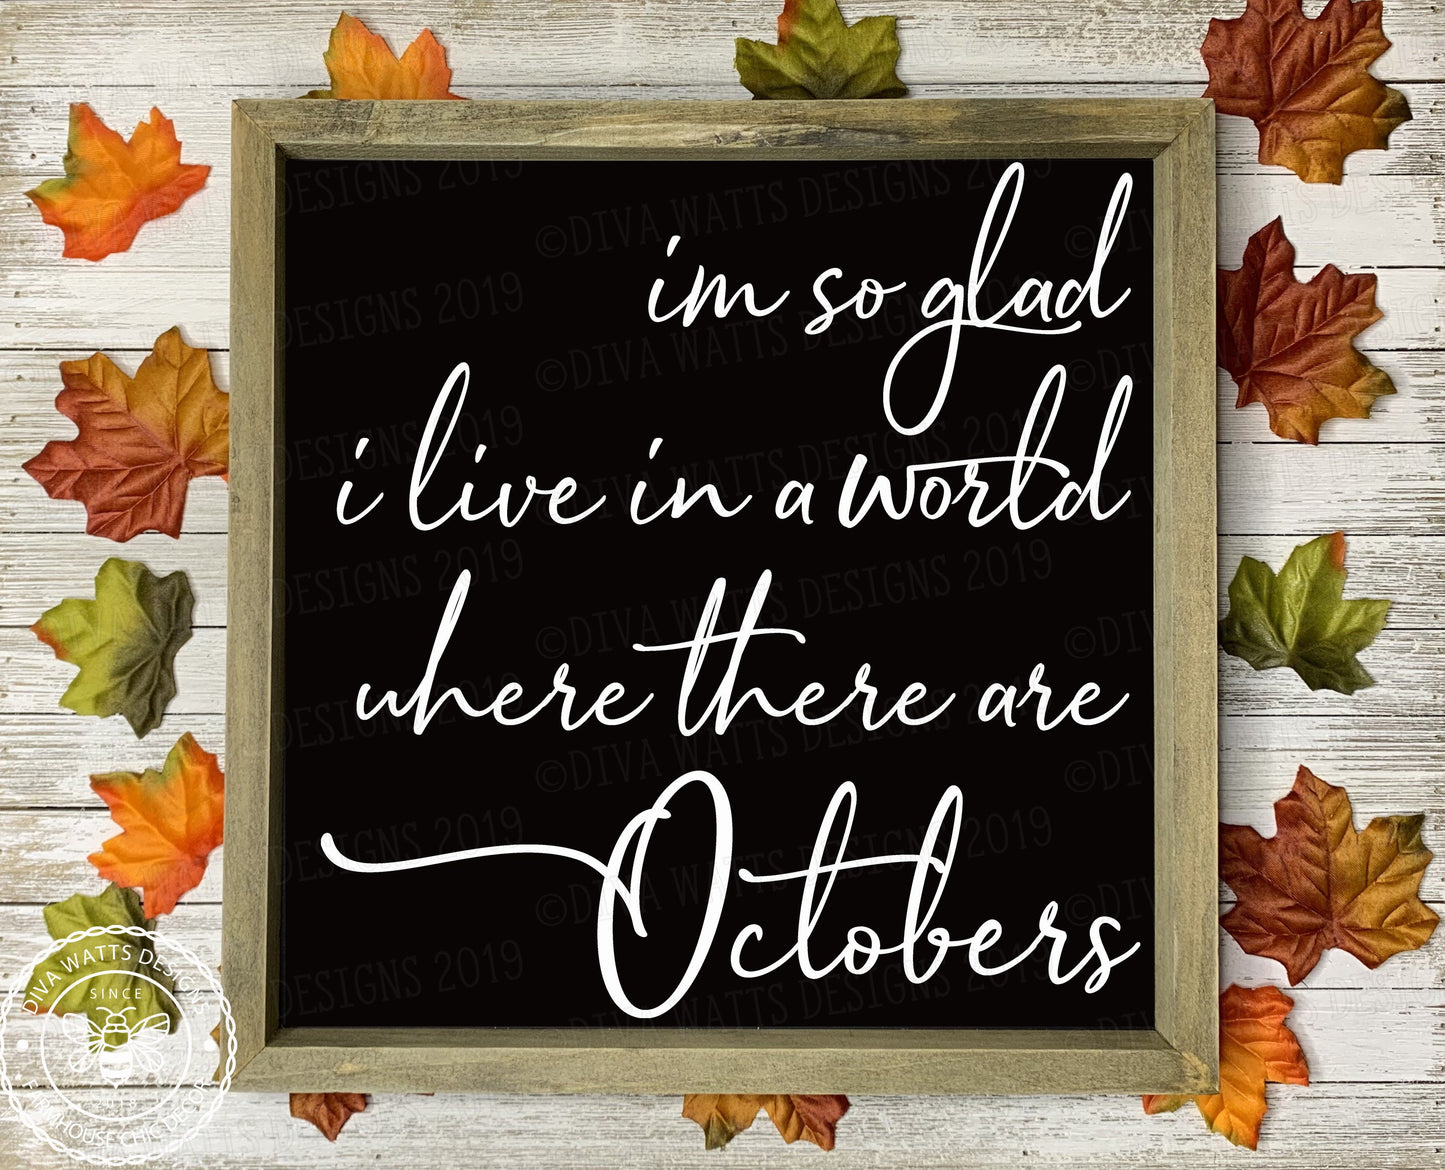 SVG I'm so Glad I live in a World Where There Are Octobers | Cutting File | DXF PNG eps | Vinyl Stencil | Instant Download Autumn Fall